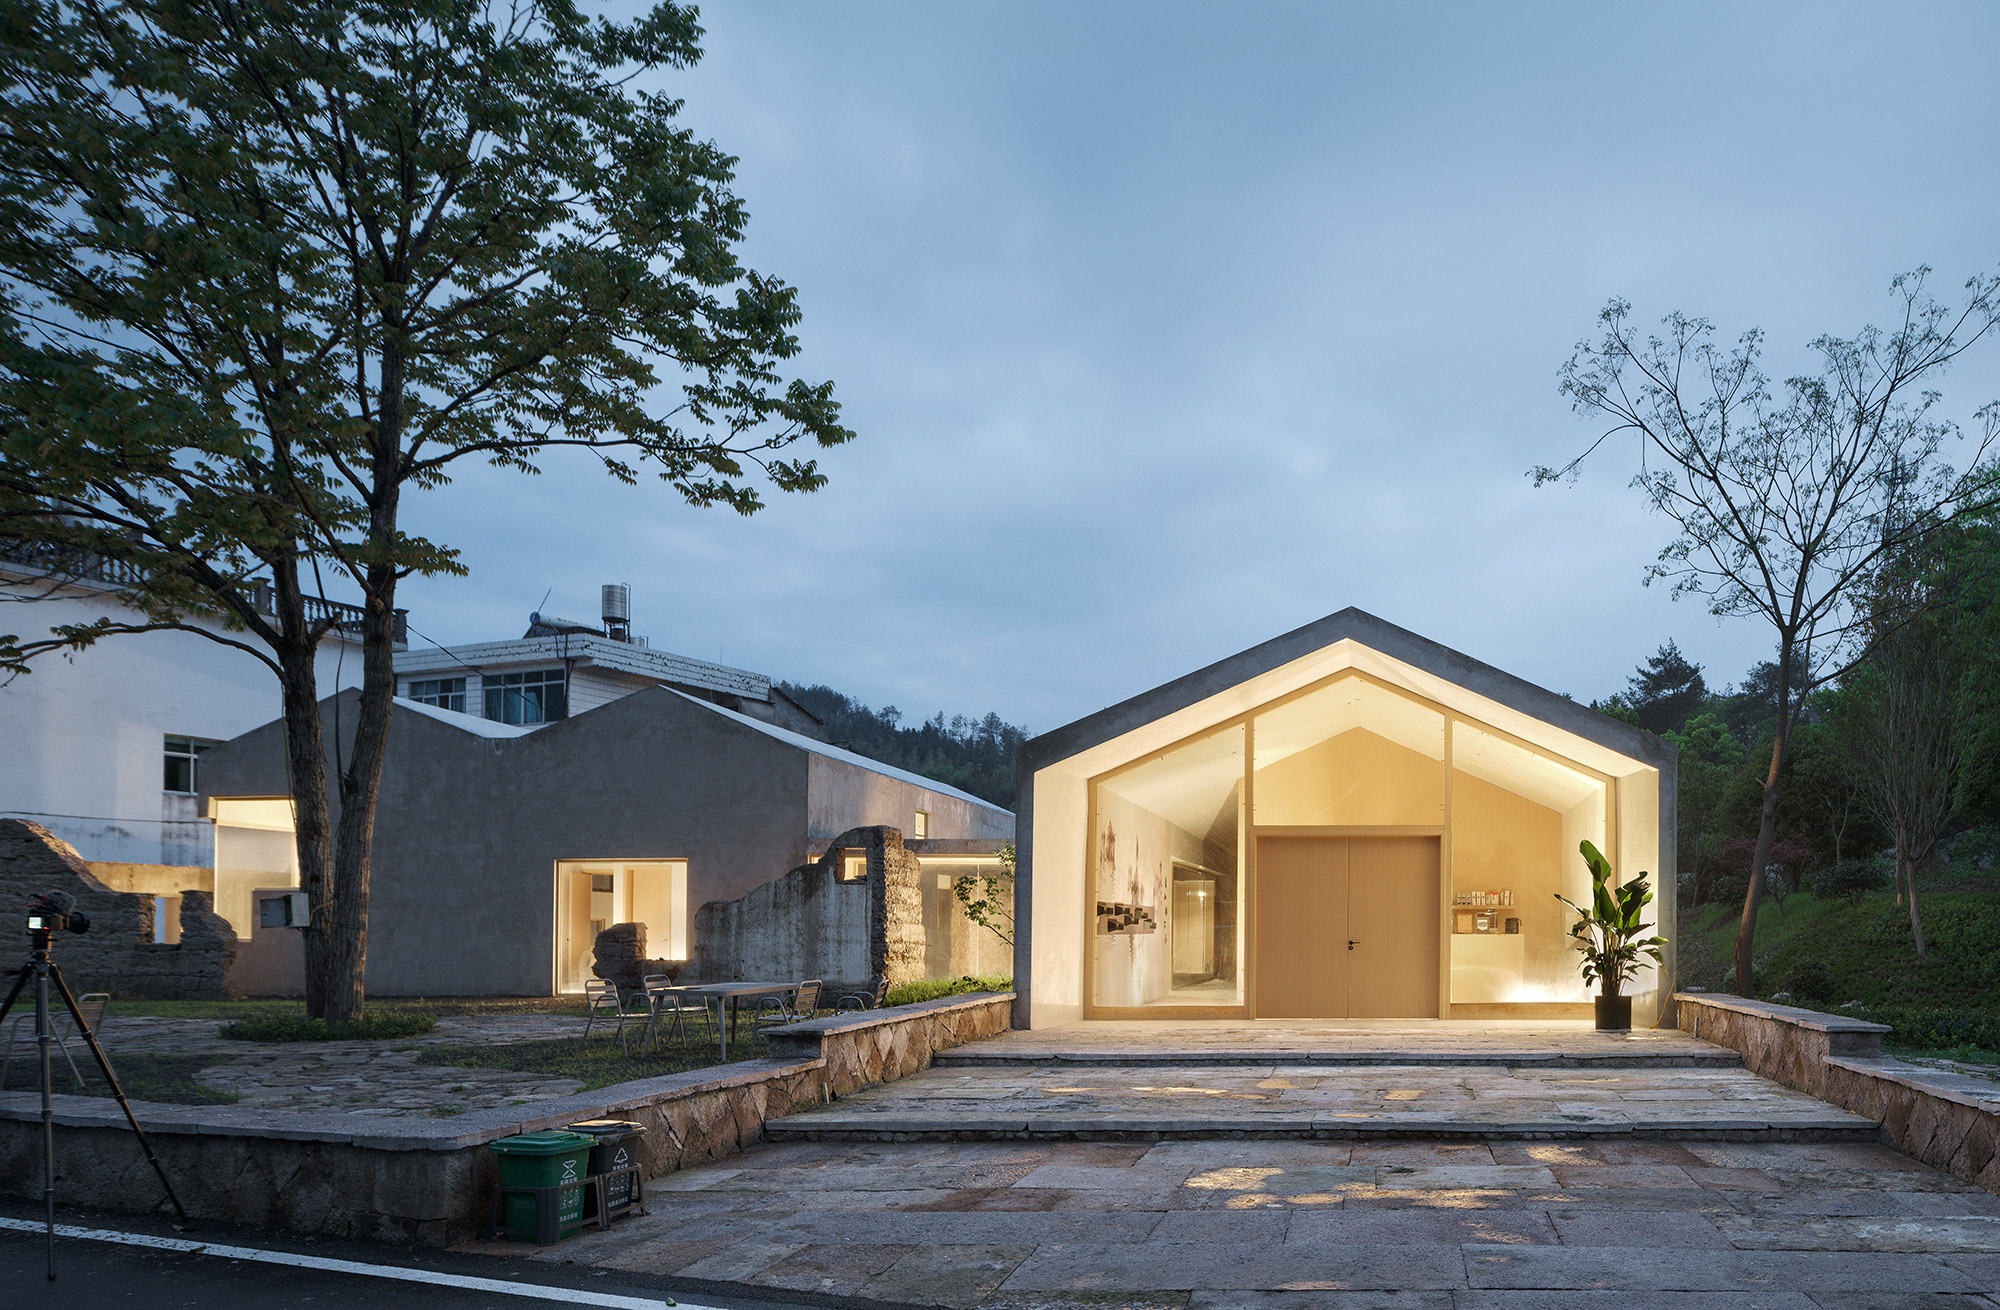 Villagers’ Home in Wanghu Village by UAD: Revitalizing Rural Spaces with Natural Prototypes